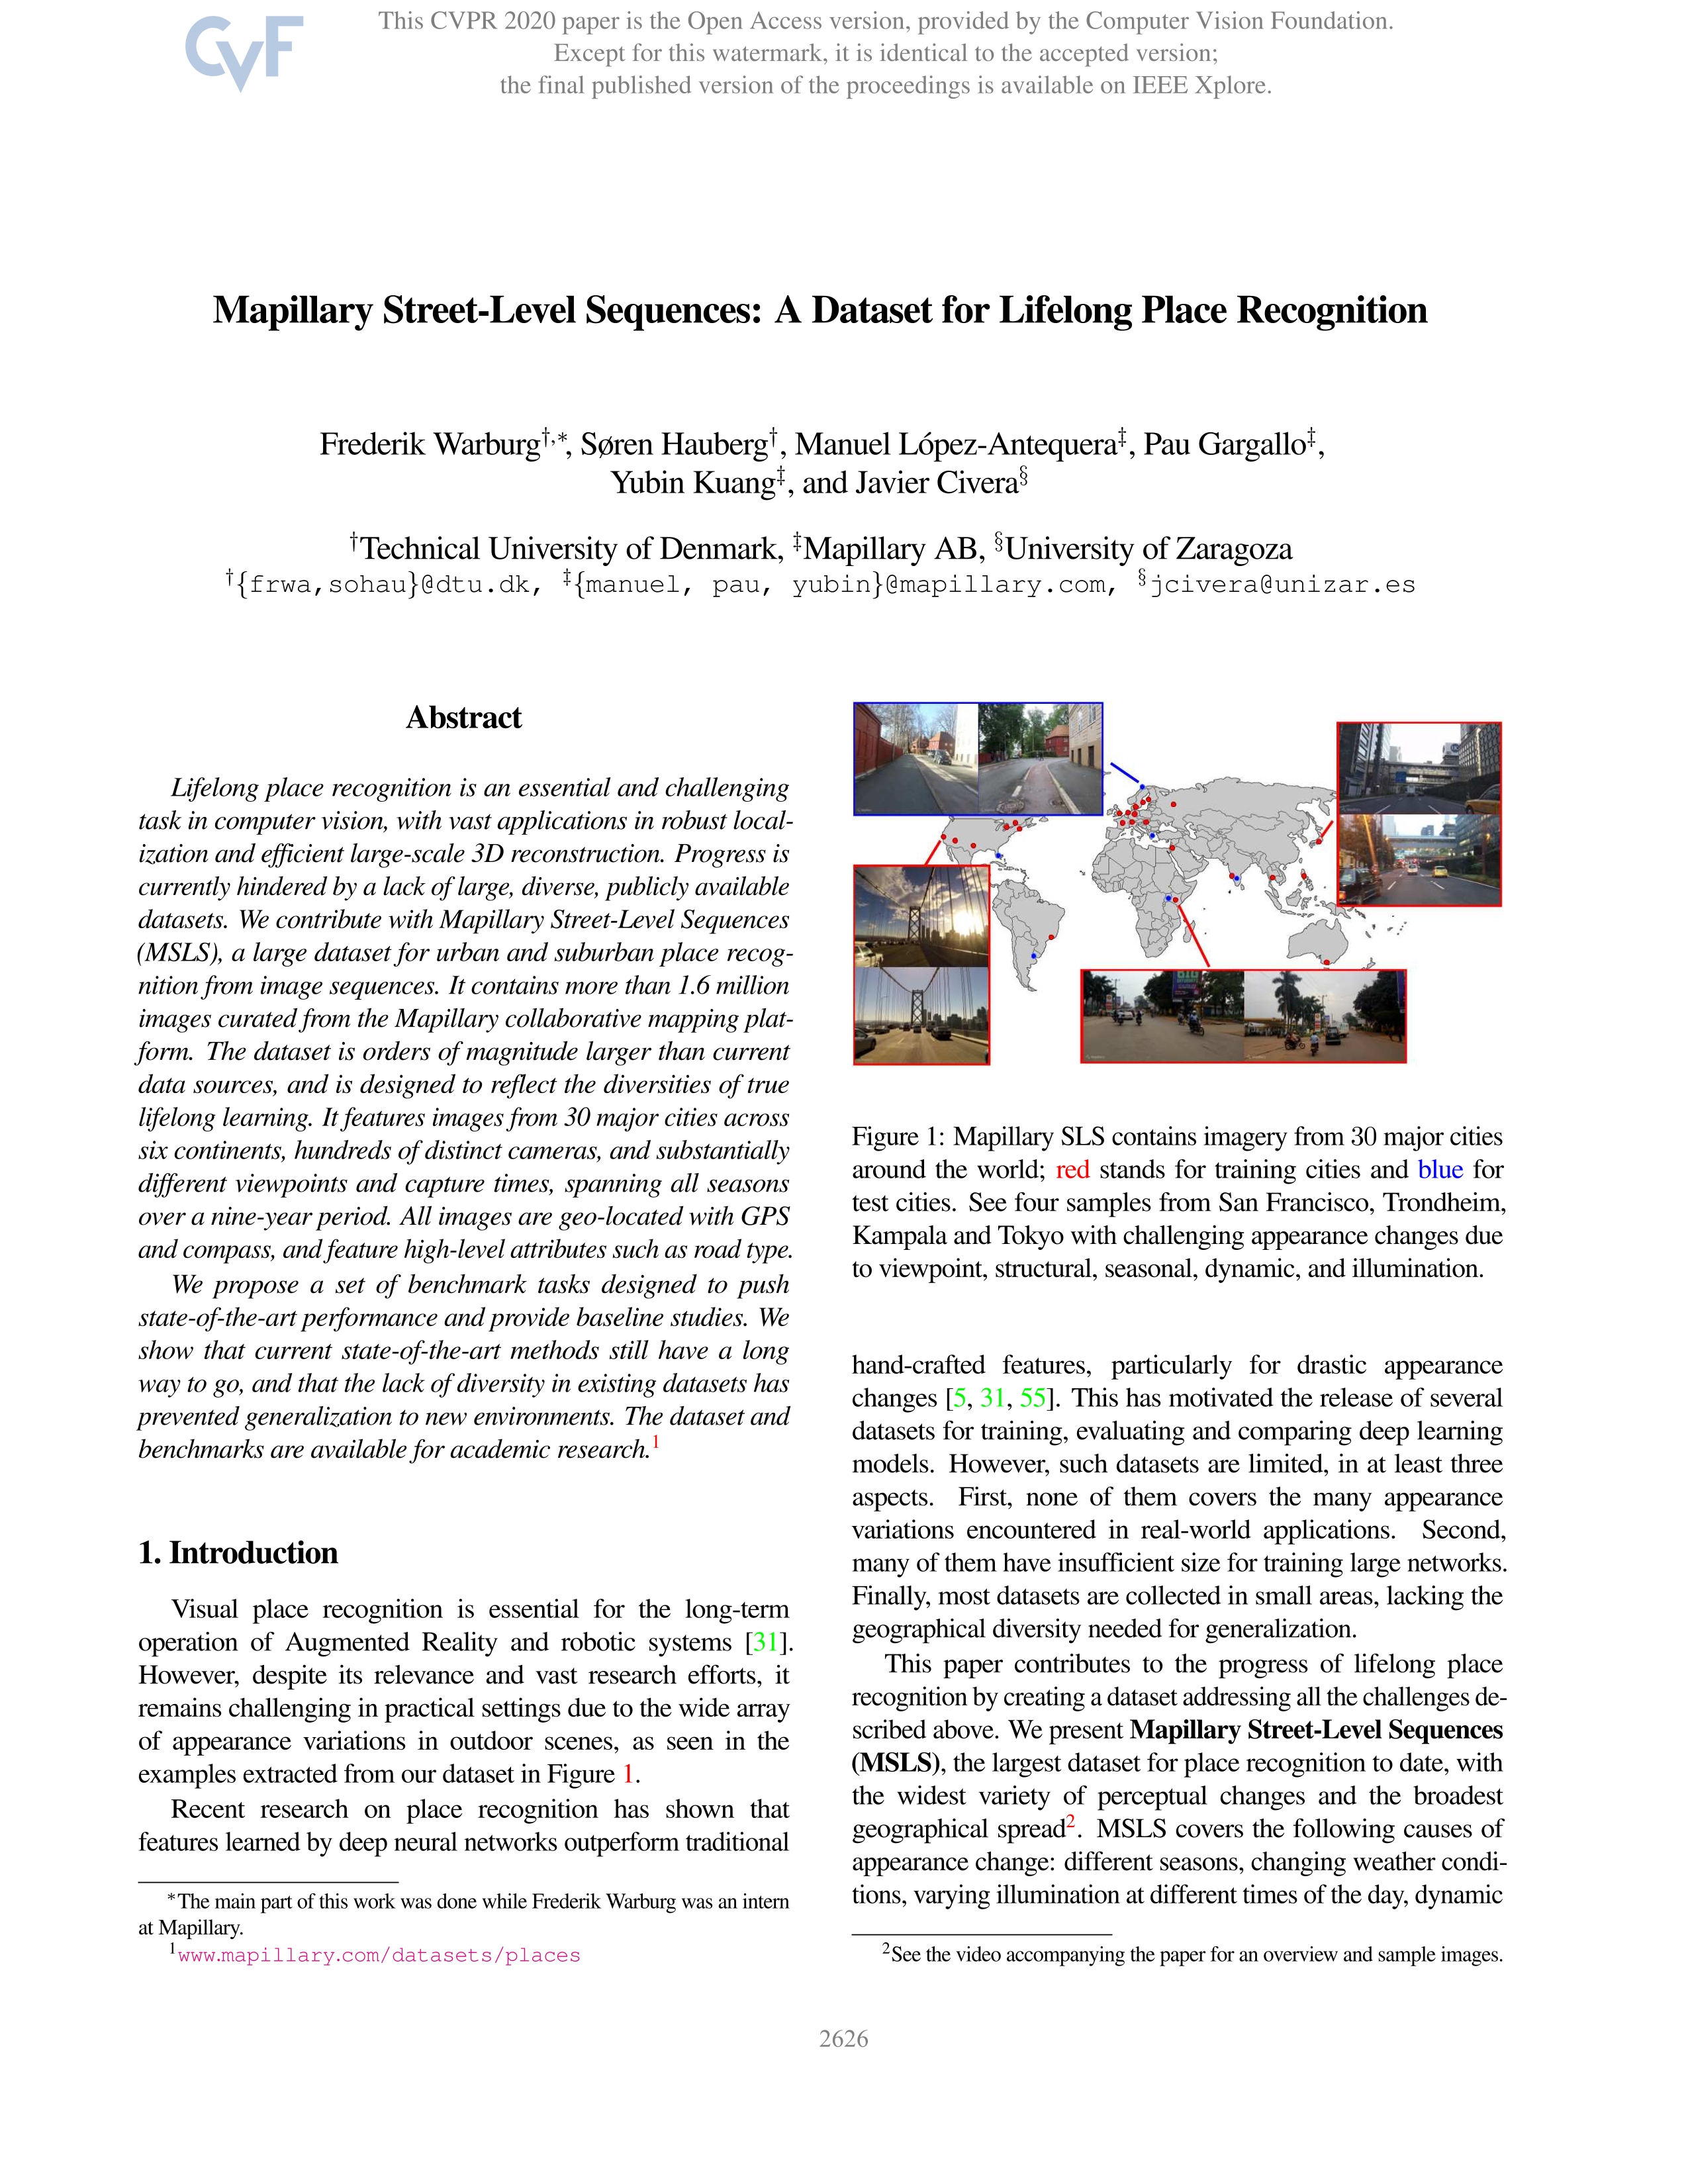 Mapillary street-level sequences: A dataset for lifelong place recognition